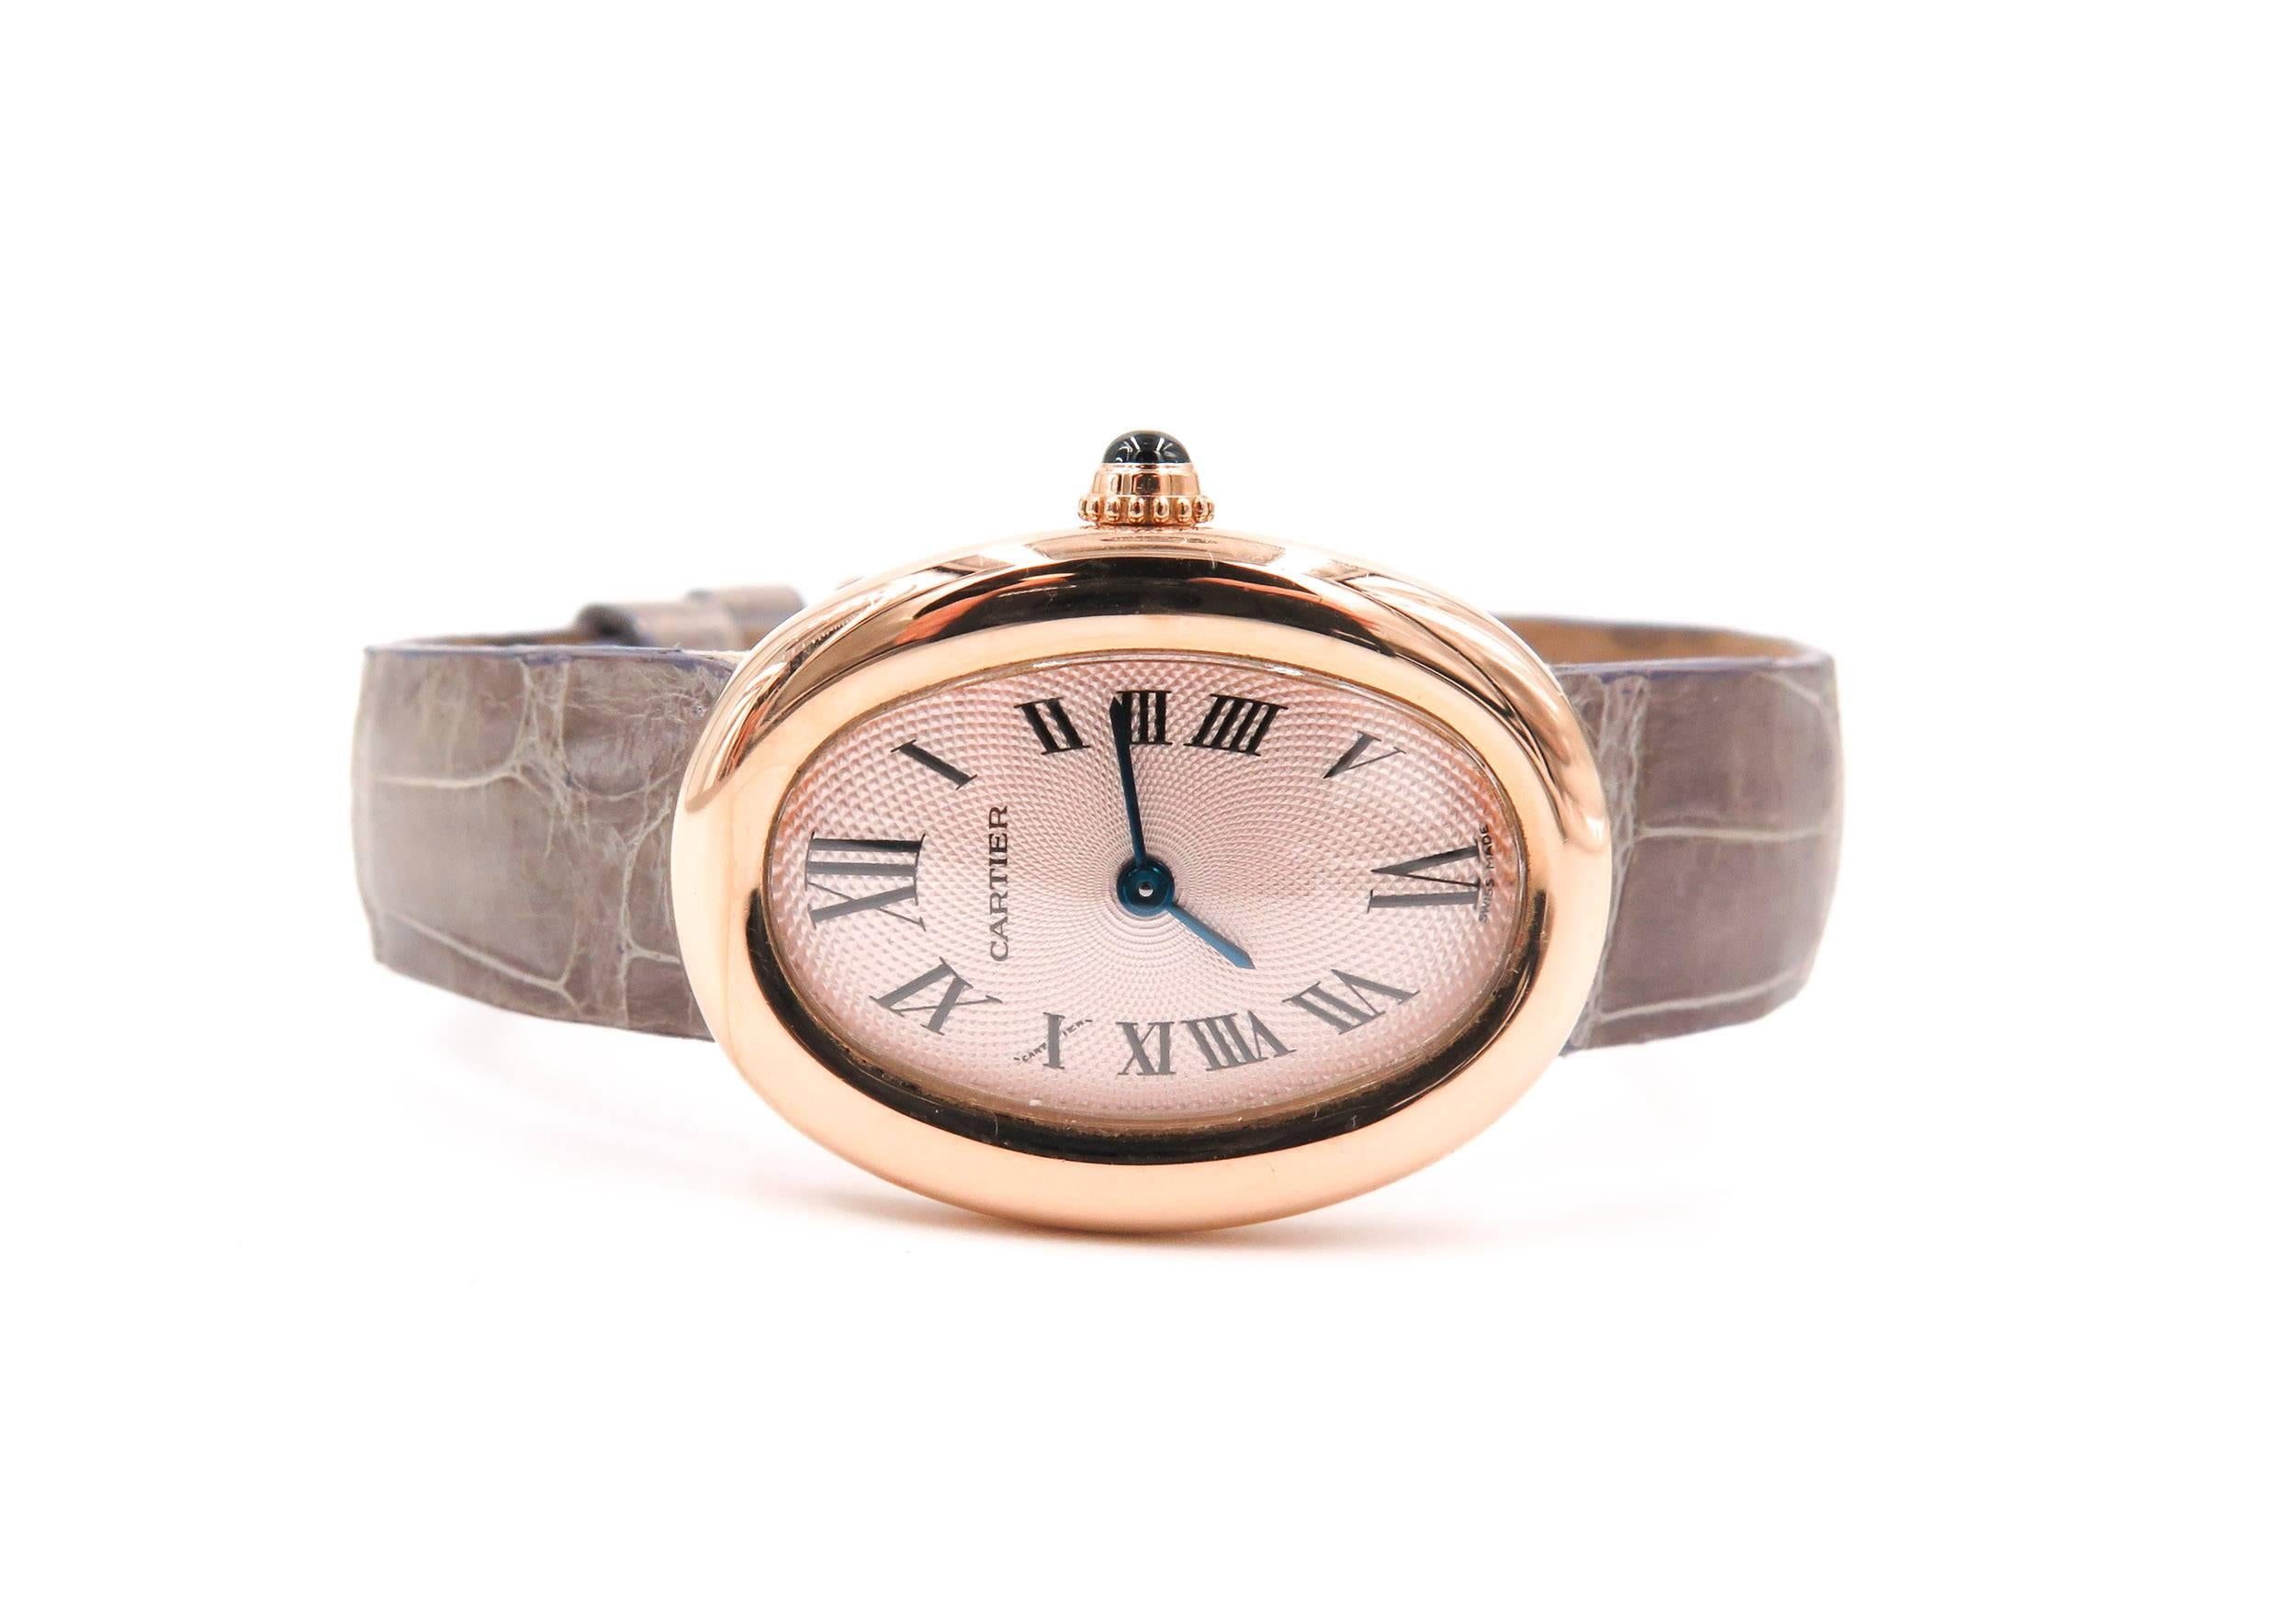 The design of this watch, the Baignoire demonstrated Cartier's prowess in crafting watchmaking forms. An elegant ellipse uniquely forged in a single line, the Baignoire watch is the essence of Cartier style: an unmatched marriage of purity and